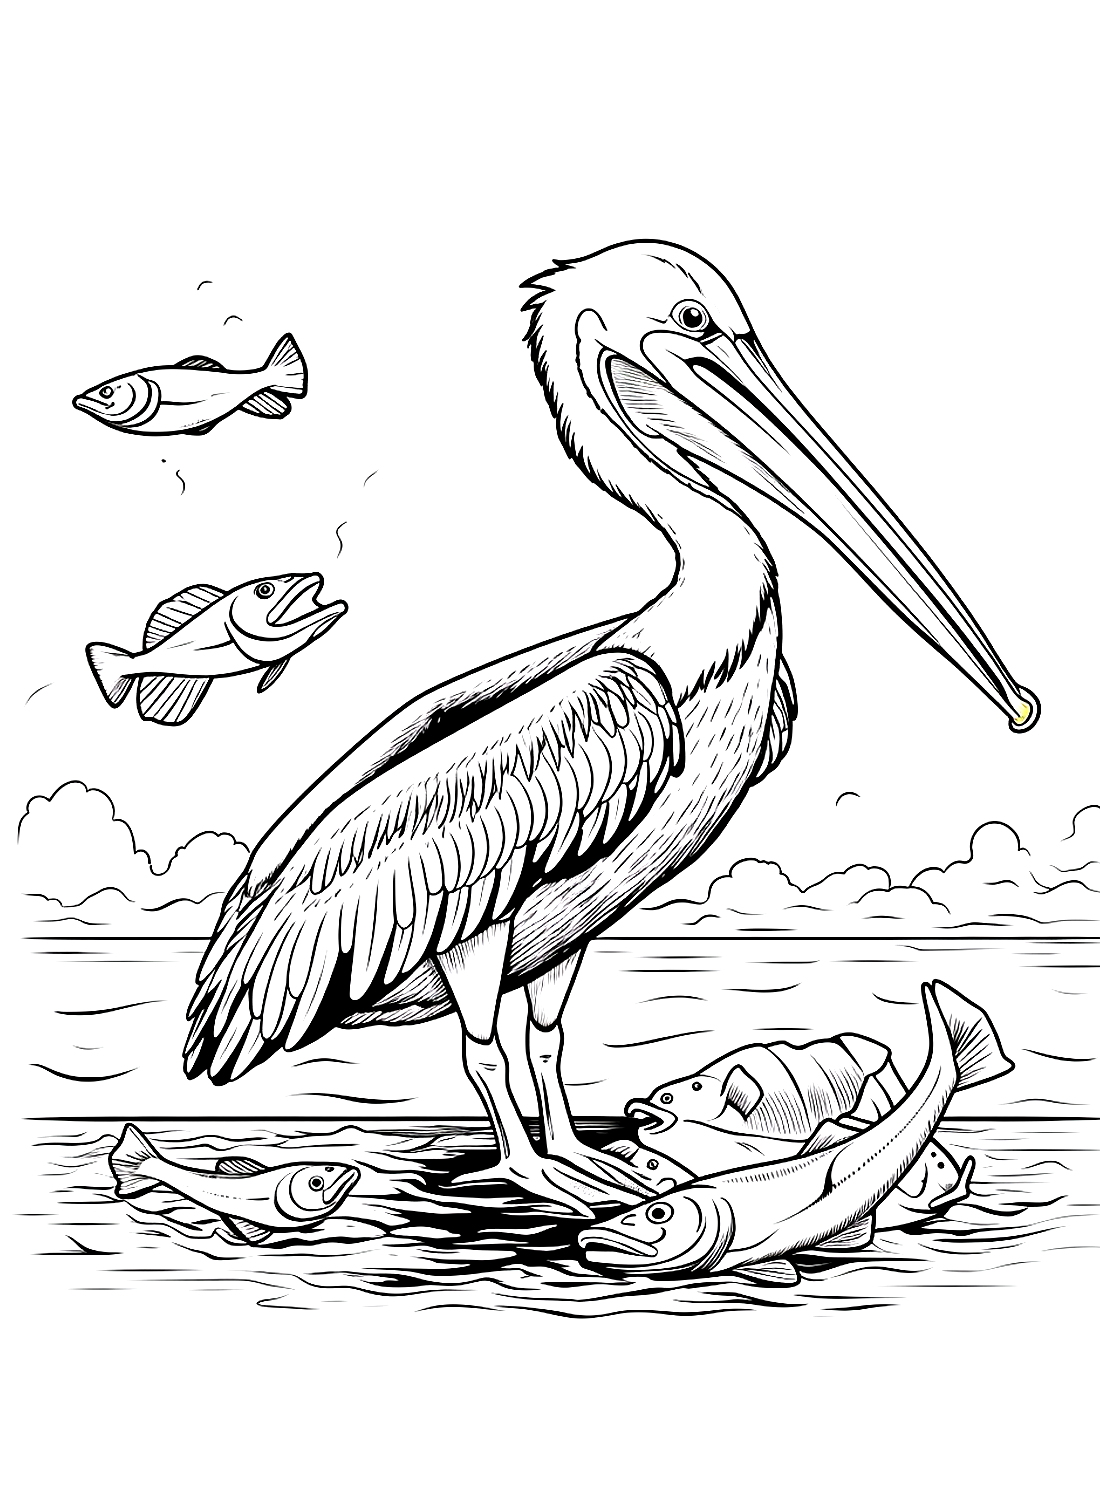 Pelican and fishes from Pelican